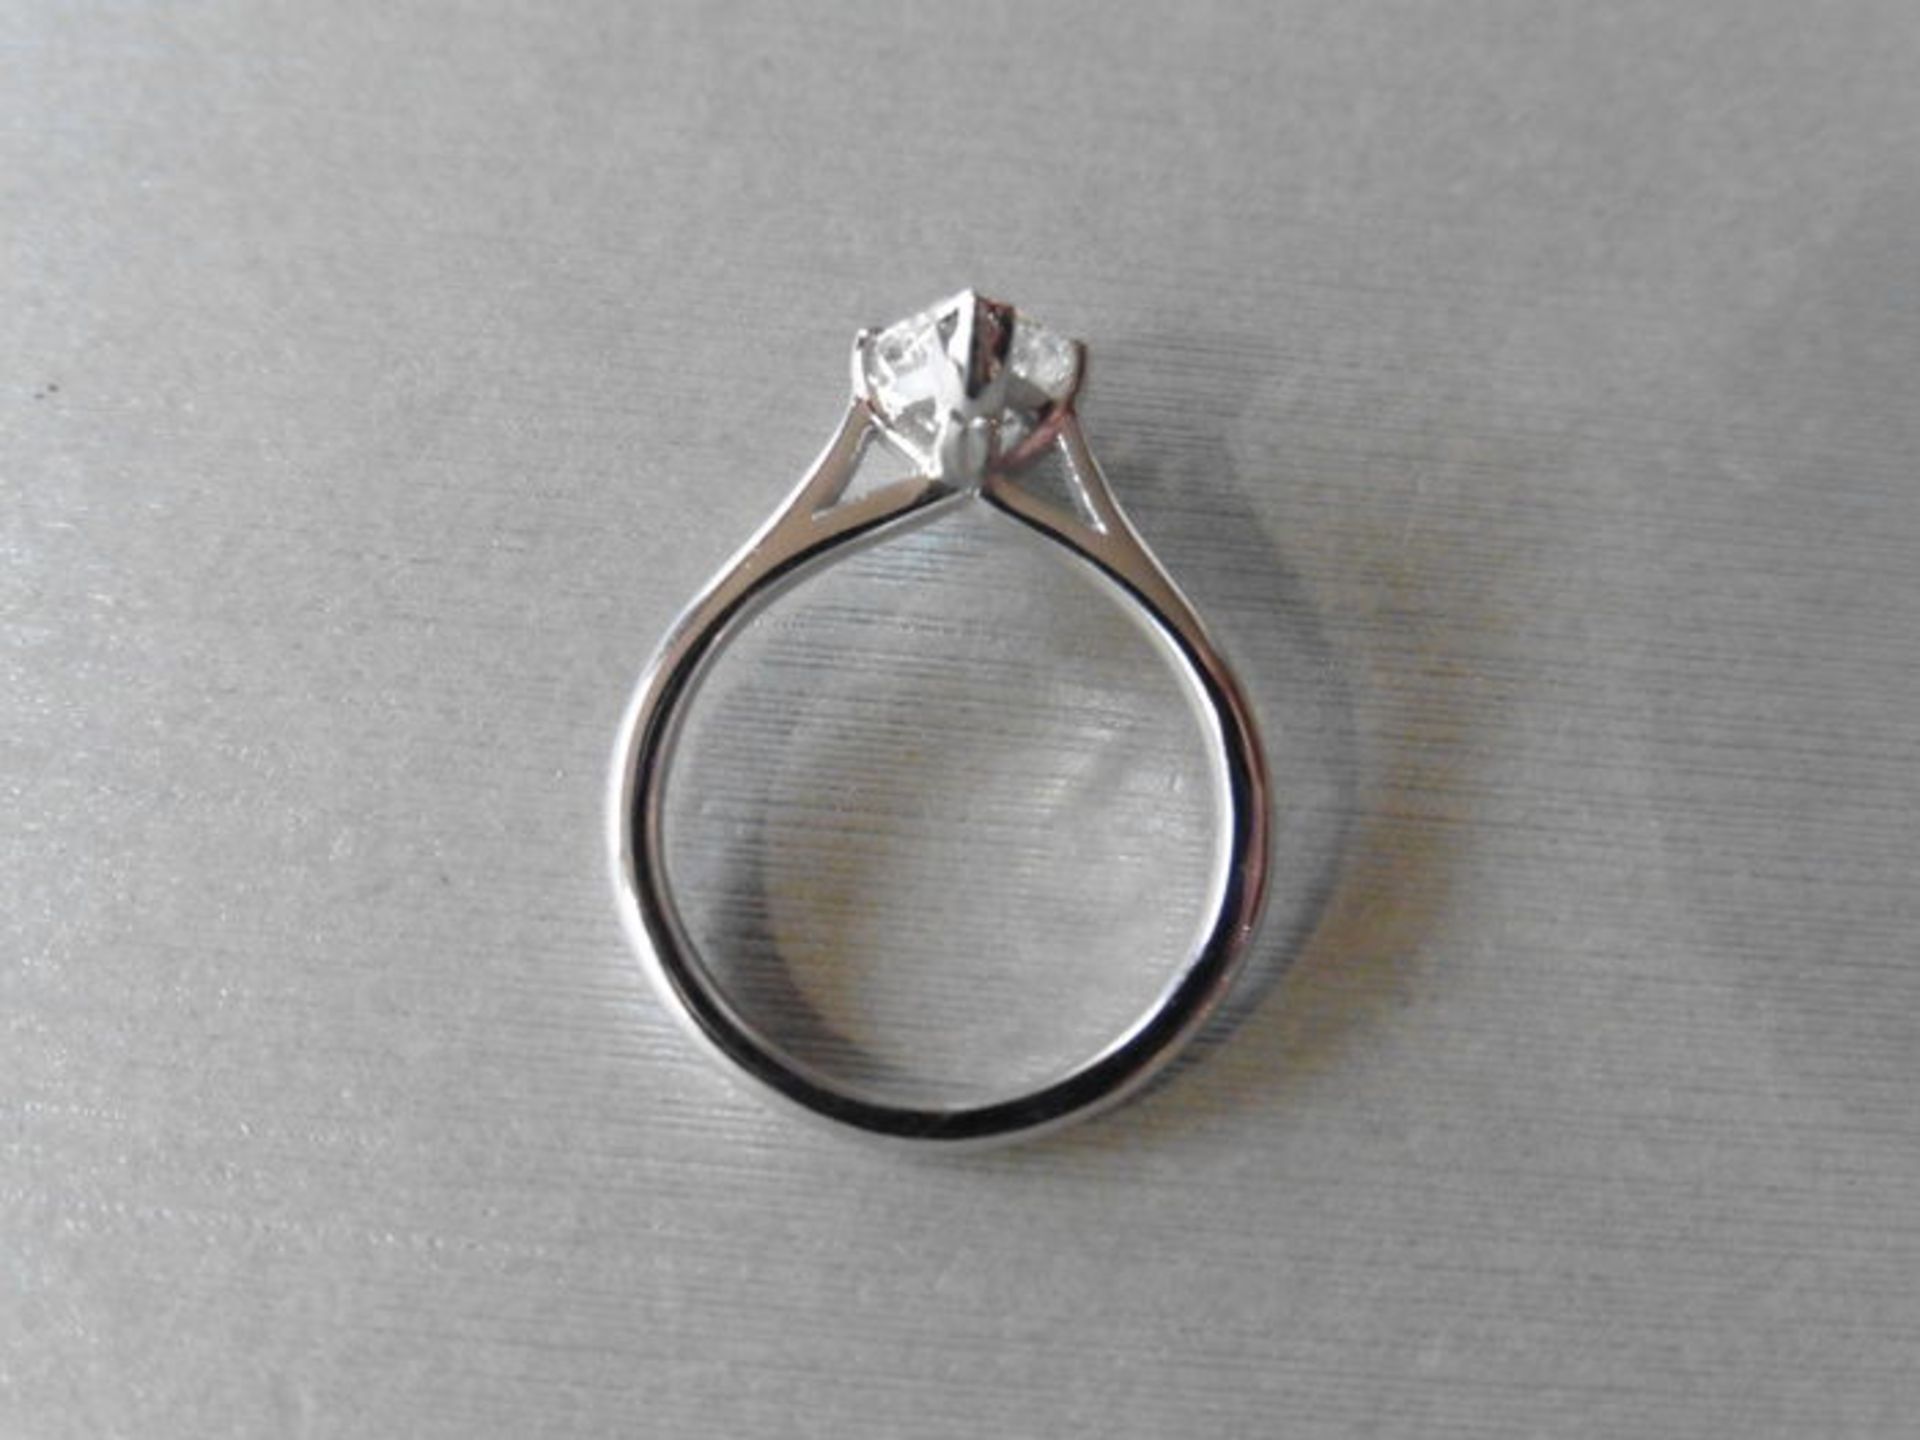 2.45ct marquis natural diamond,si2 clarity K colour,18ct white gold setting 3.9gms,uk size L, - Image 2 of 3